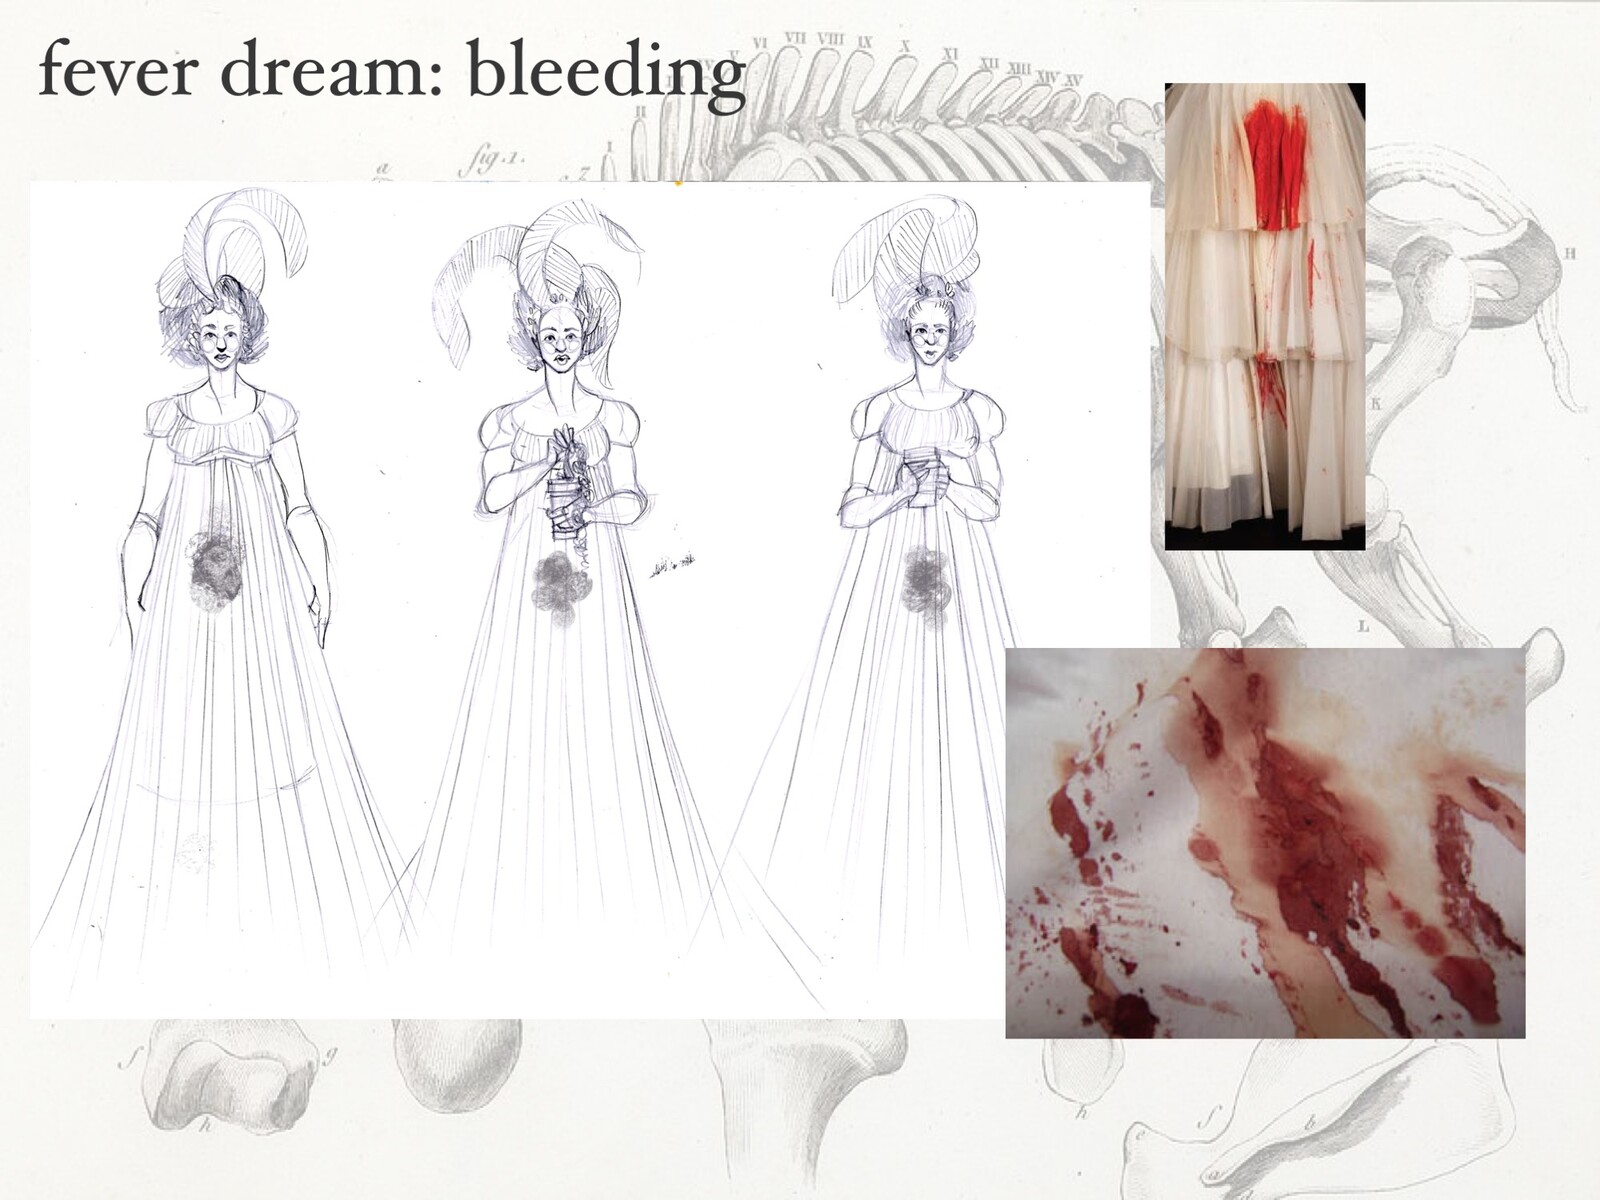 These dresses bled; some distressing references are above.